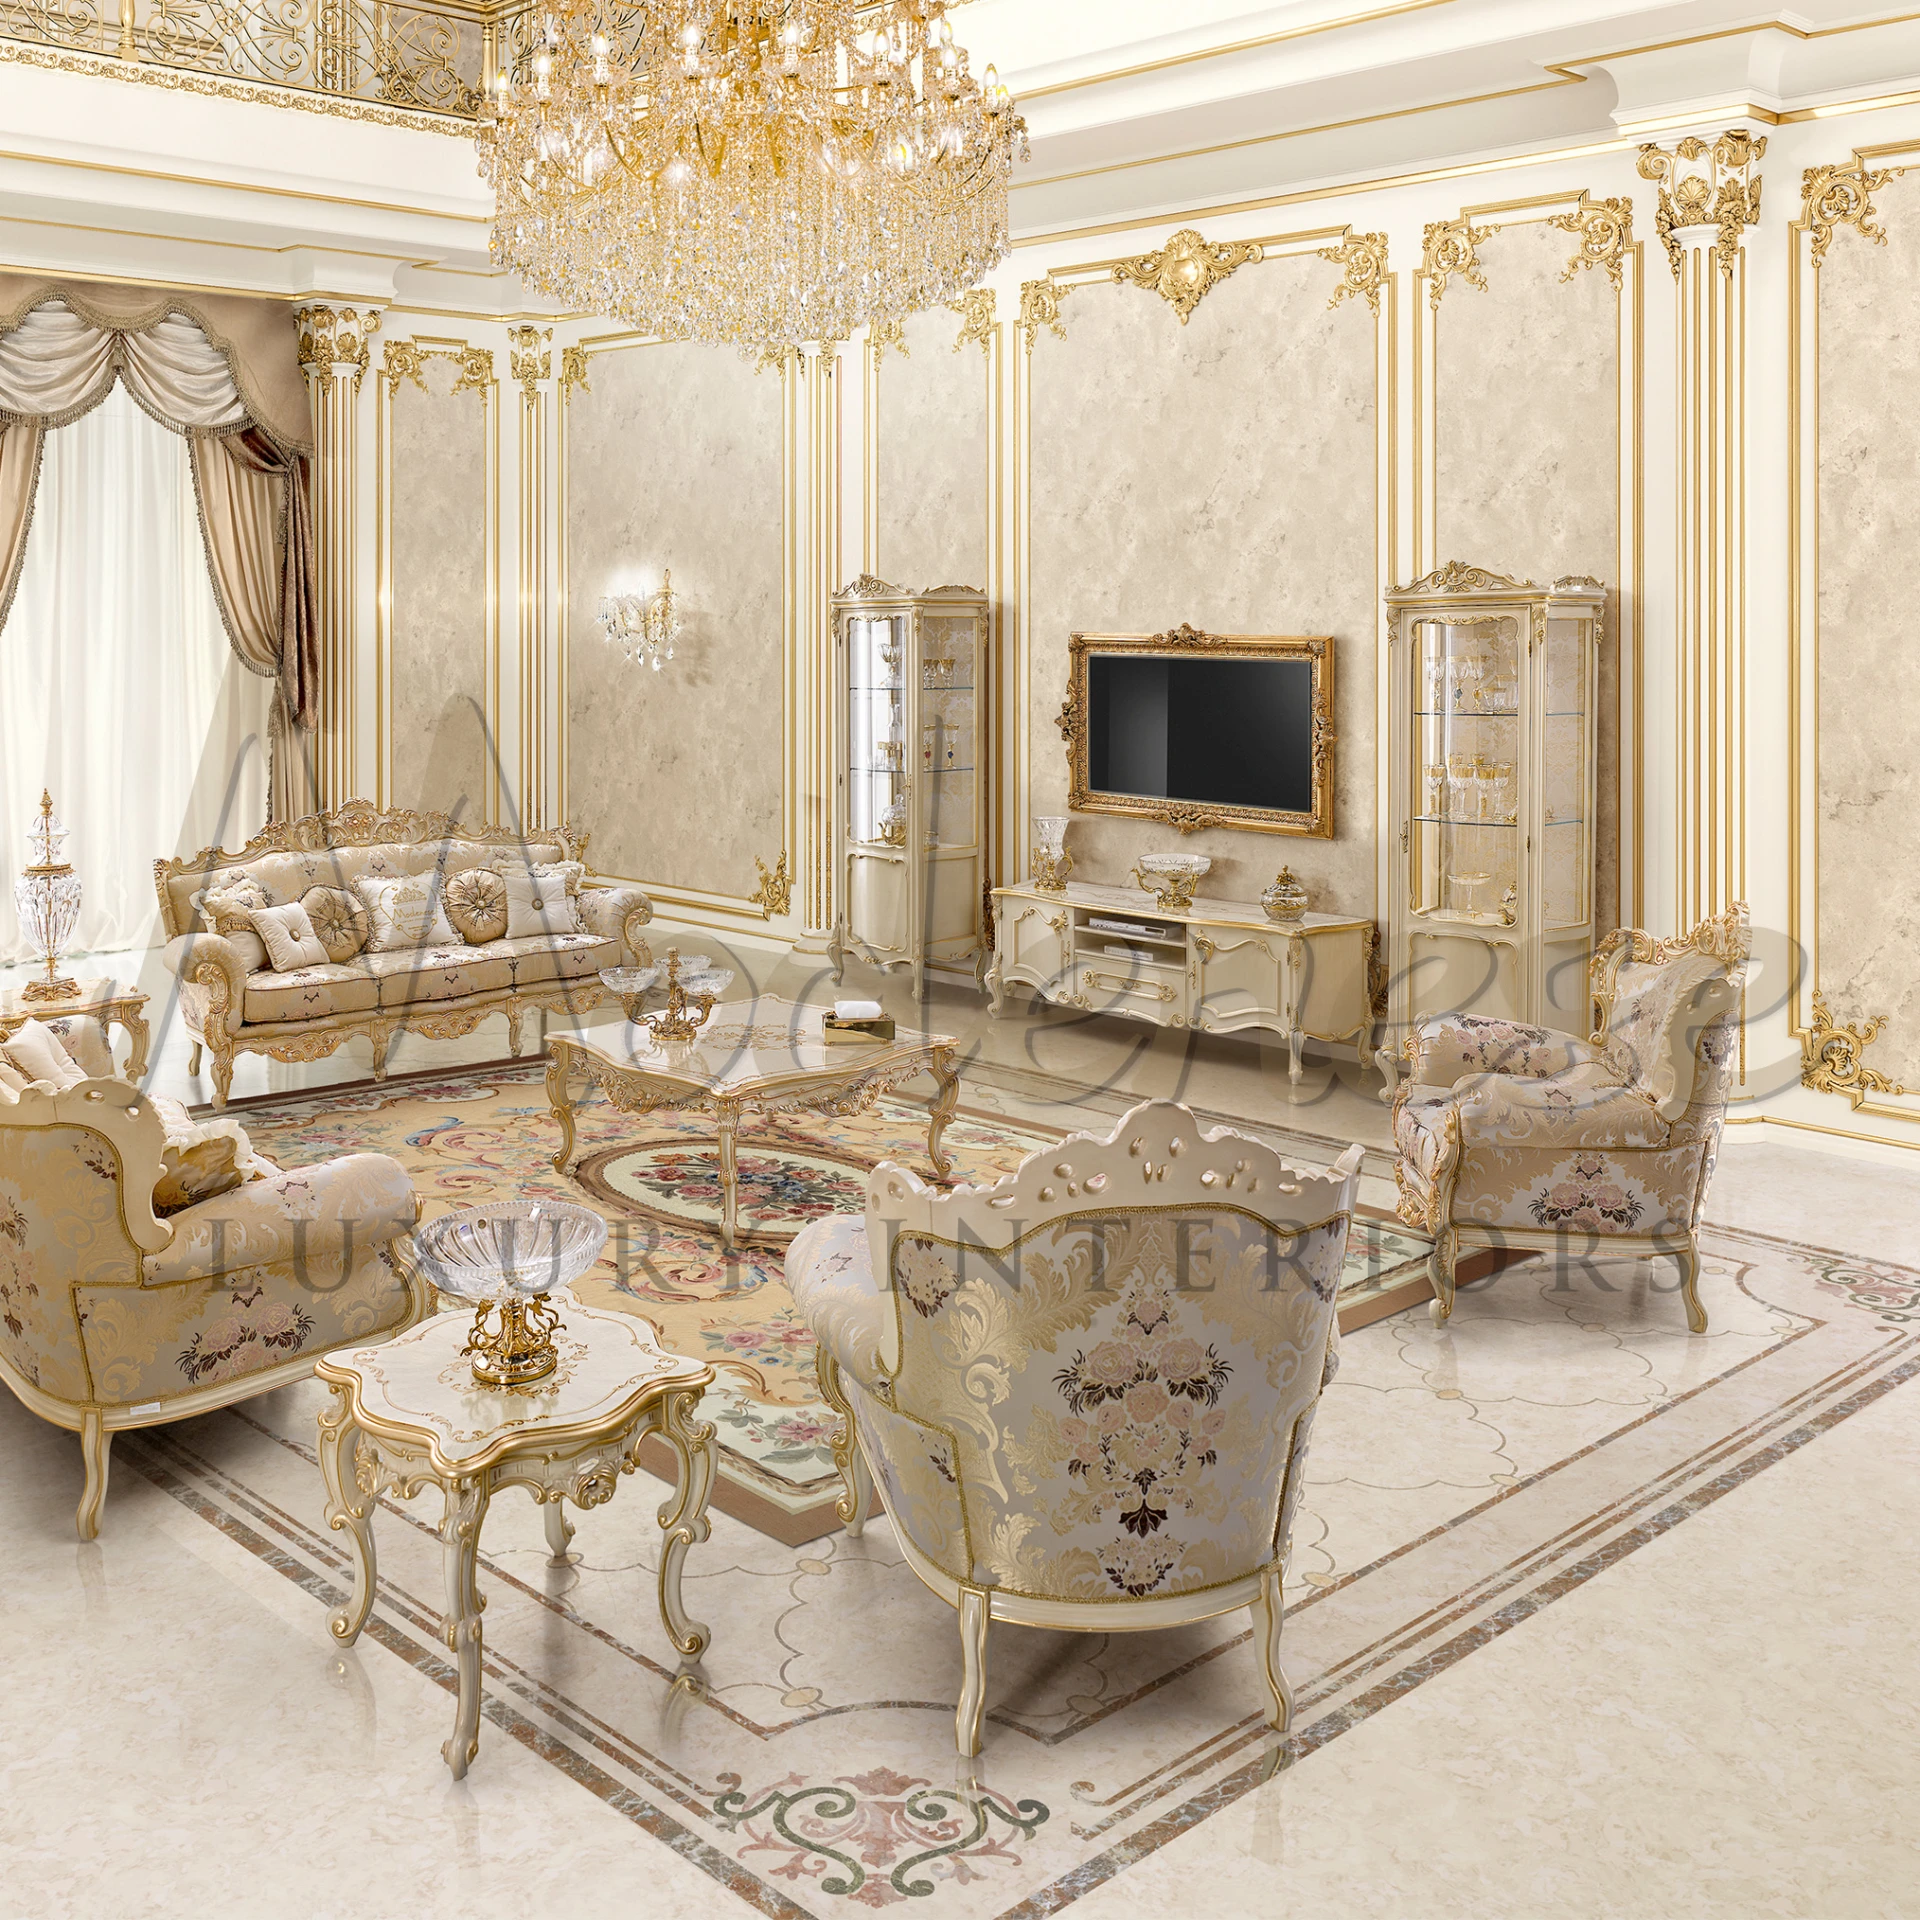 A big luxurious room with gold and white furniture, a fancy chandelier, cabinets and a TV in a golden frame on the wall.